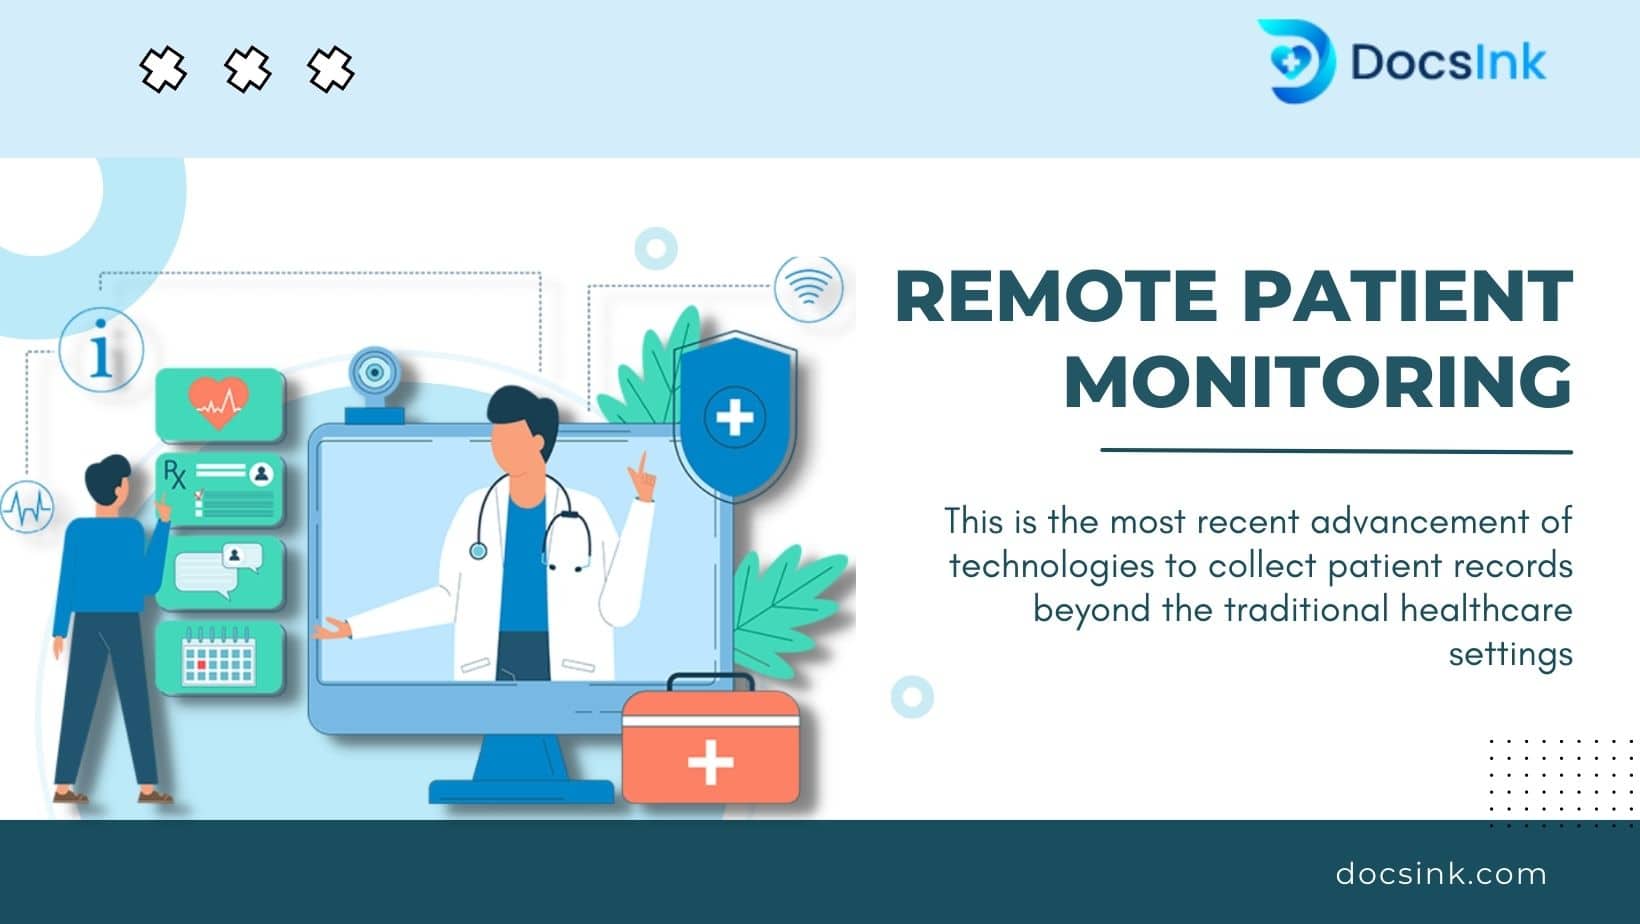 Why choose Remote Patient Monitoring?